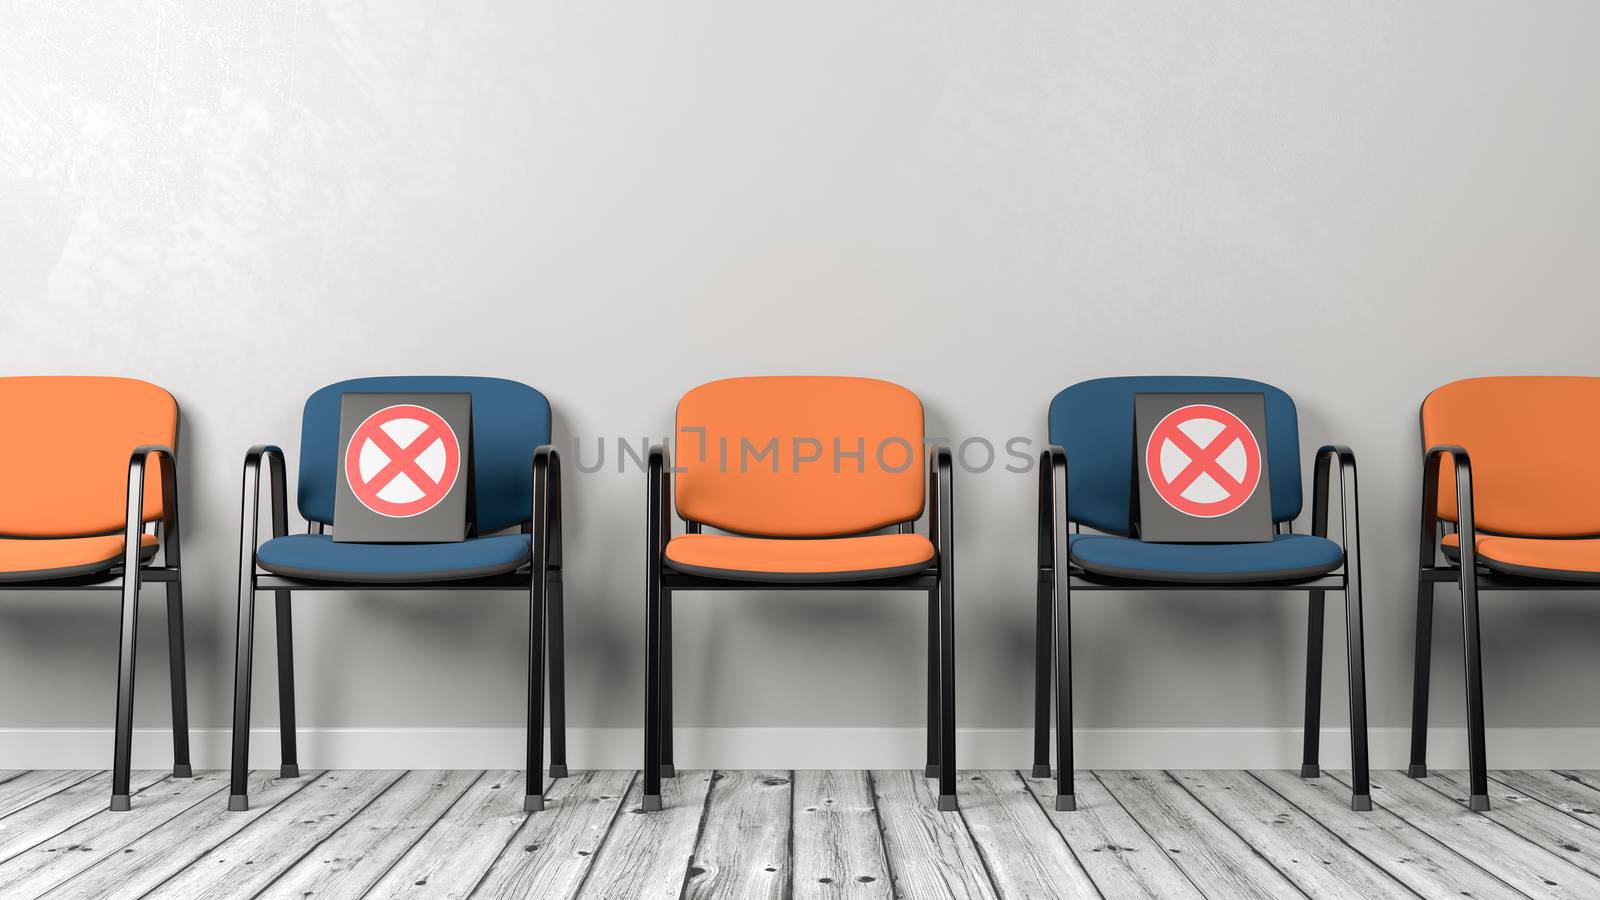 Orange and Blue Alternate Color Chairs in a Row with Prohibition Sign on Wooden Floor Against Grey Wall 3D Illustration